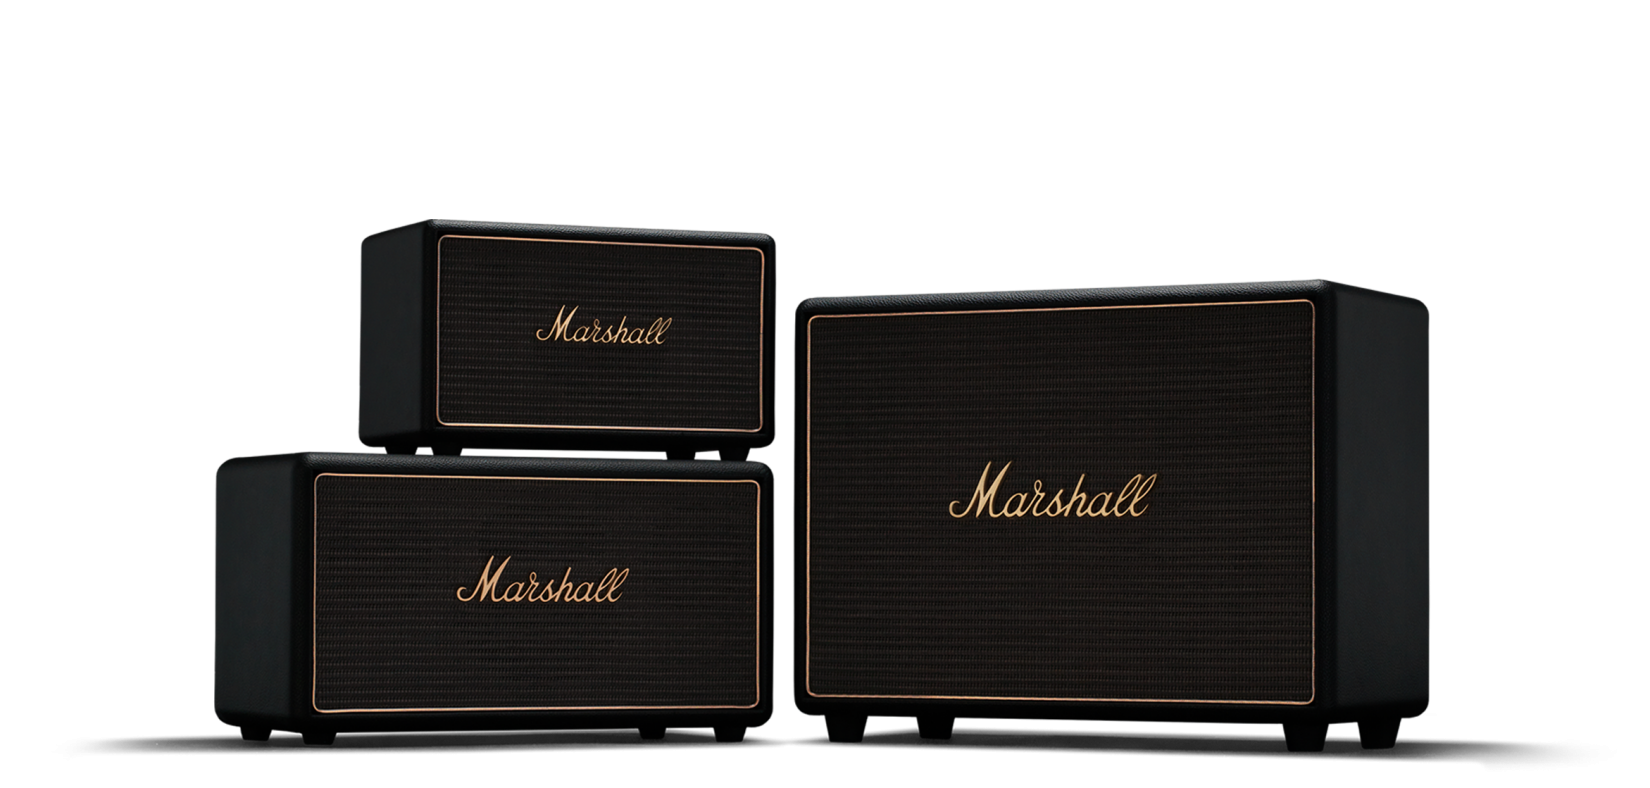 Marshall are going multi-room connected with their speakers